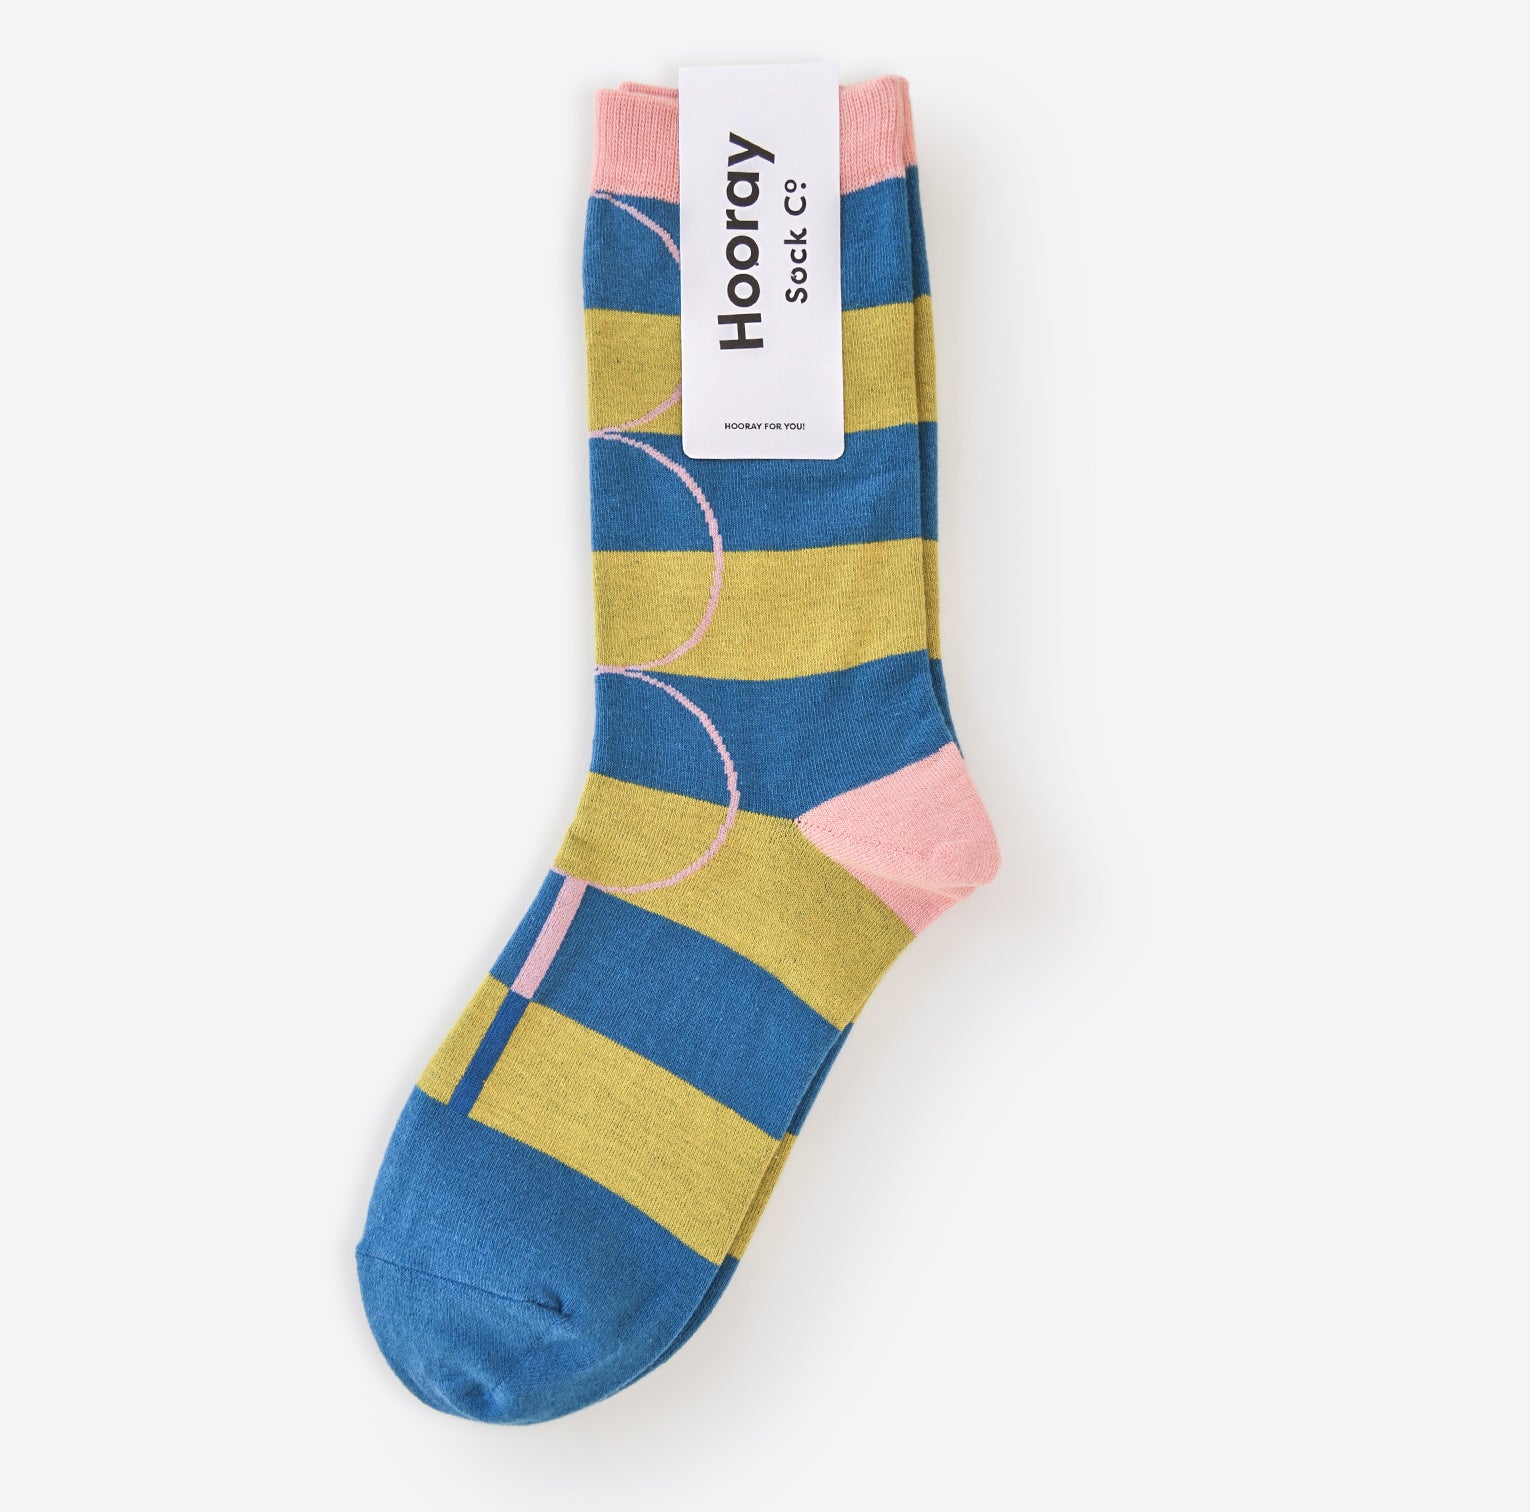 Hooray Sock Co. Polk Blue and Green Stripe Crew Socks. Groovy striped design with big circles. Crew length, 80% cotton, 20% spandex. Sizes: Large (US men’s 8-12), Small (US women's 4-10). 